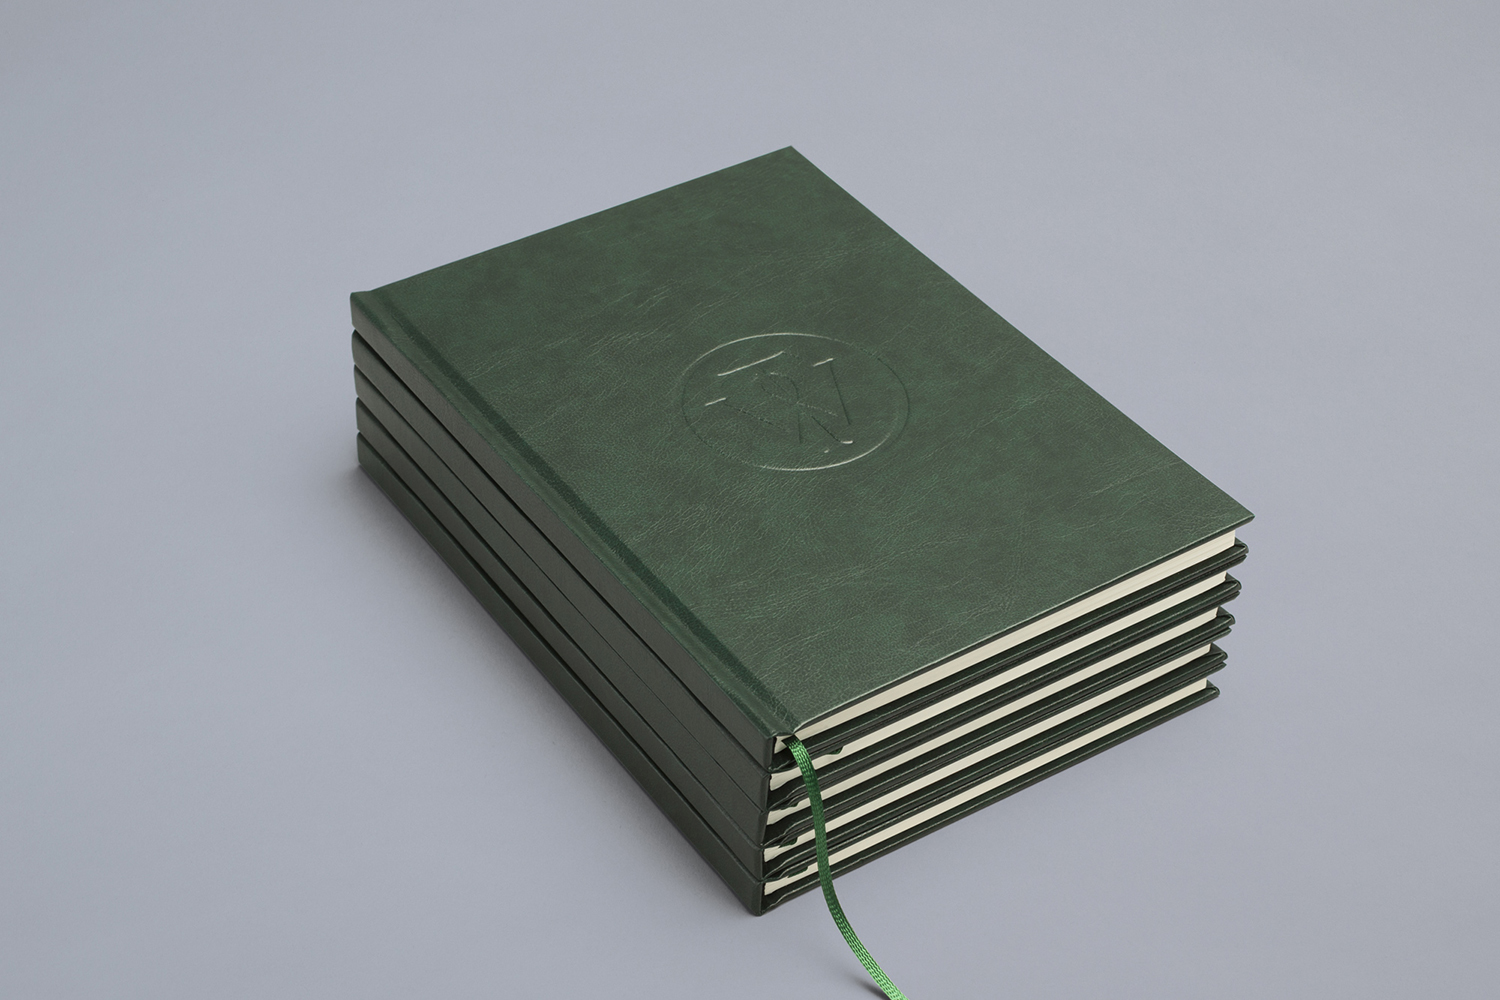 Notepad with embossed green leather cover designed by Bunch for business consultancy Willow Tree 